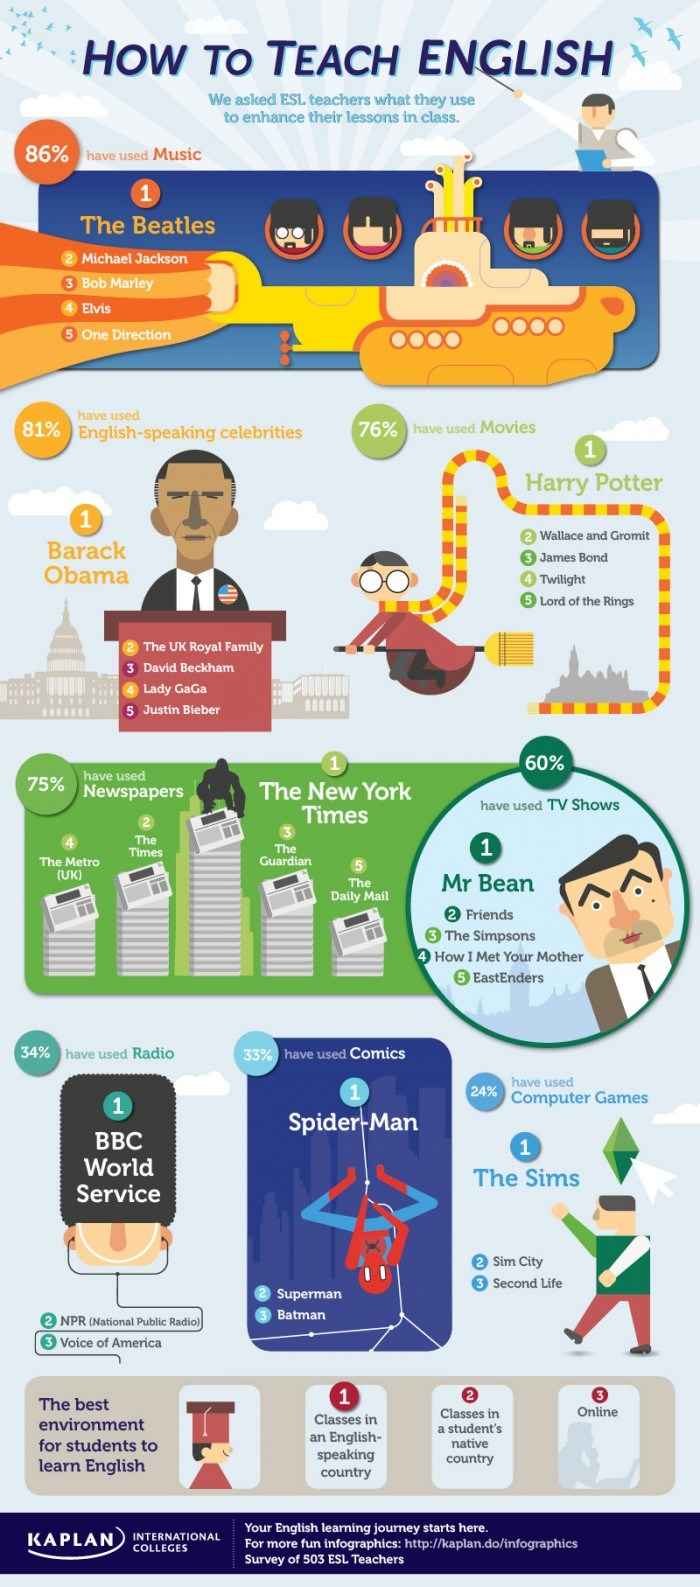 How to Teach English [Infographic] | Daily Infographic